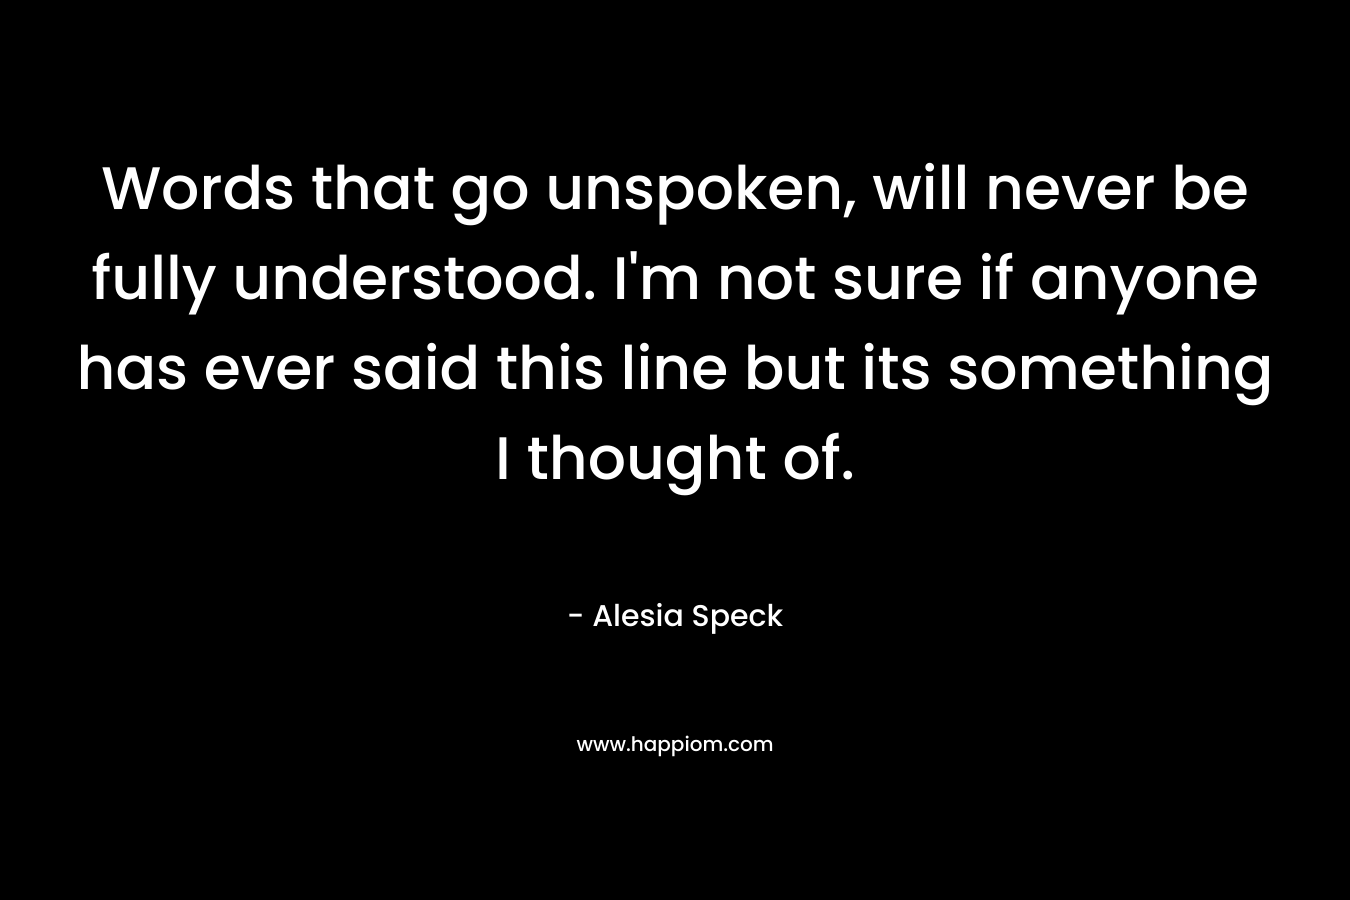 Words that go unspoken, will never be fully understood. I’m not sure if anyone has ever said this line but its something I thought of. – Alesia Speck